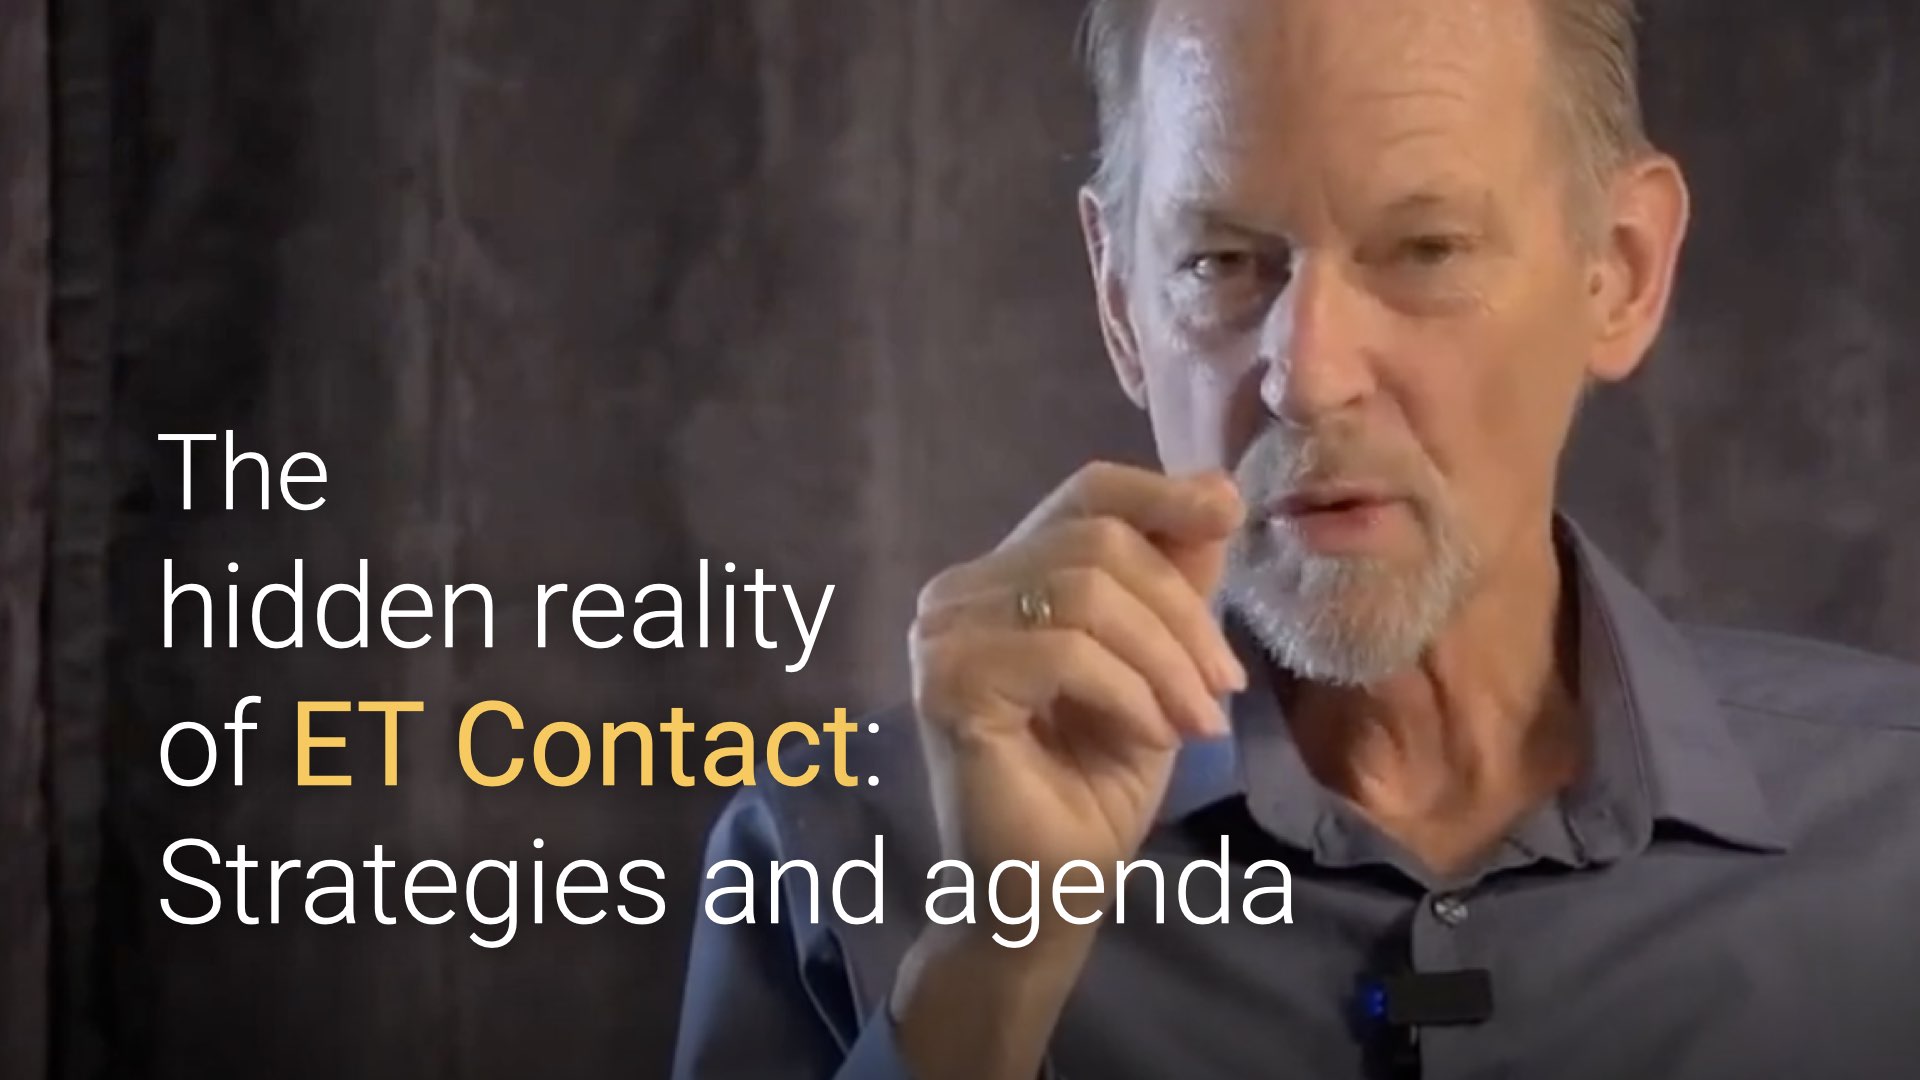 The hidden reality of ET contact: strategies and agenda.